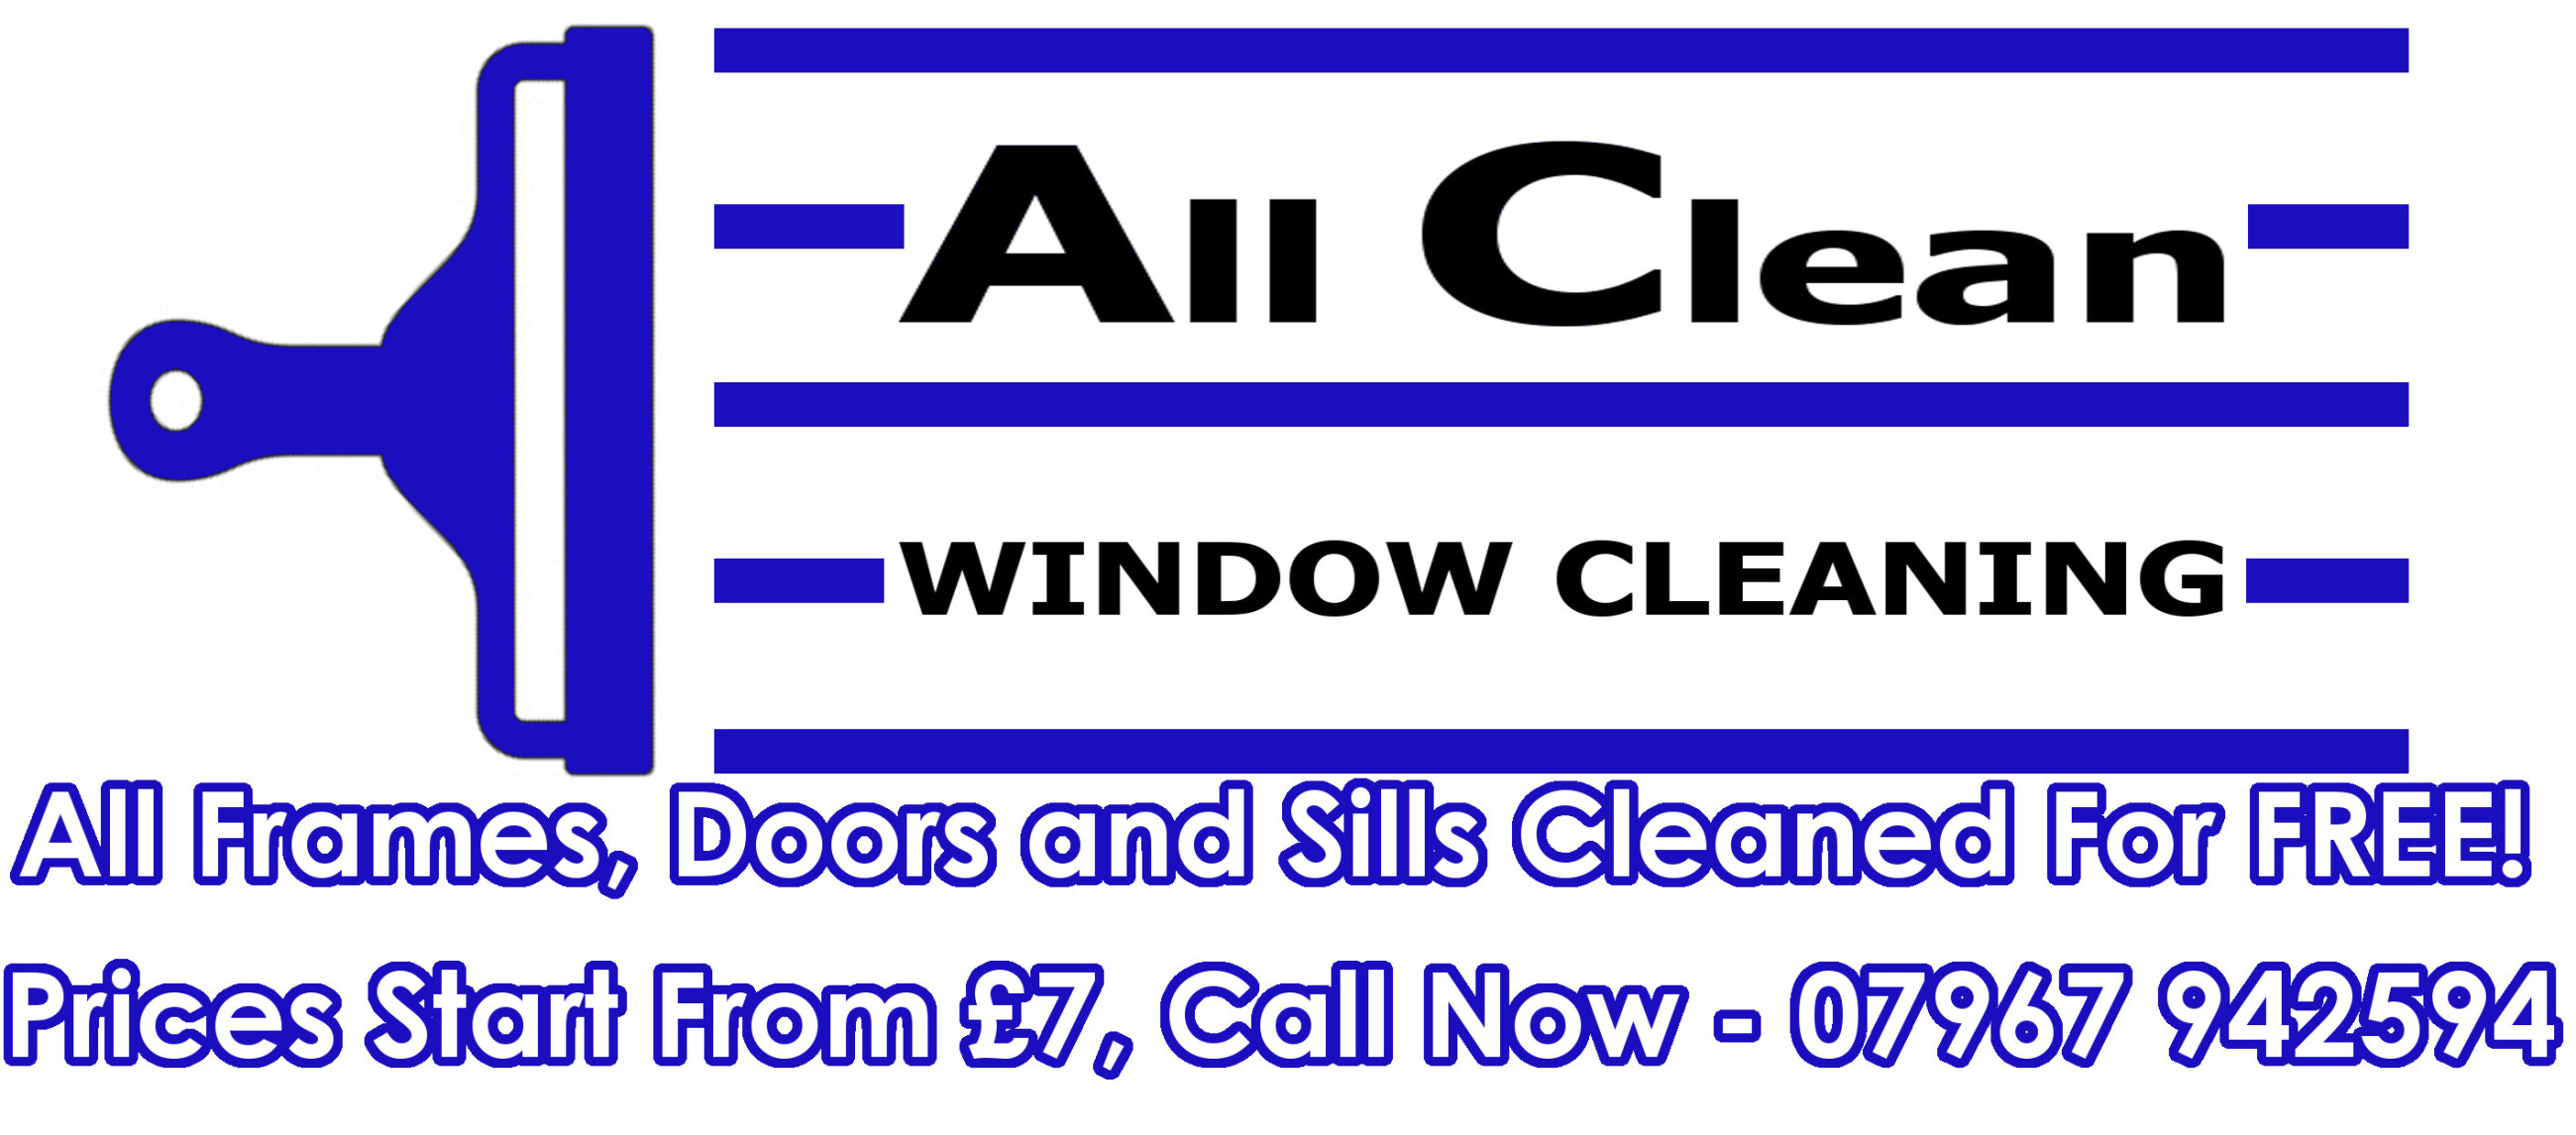 window cleaner southport